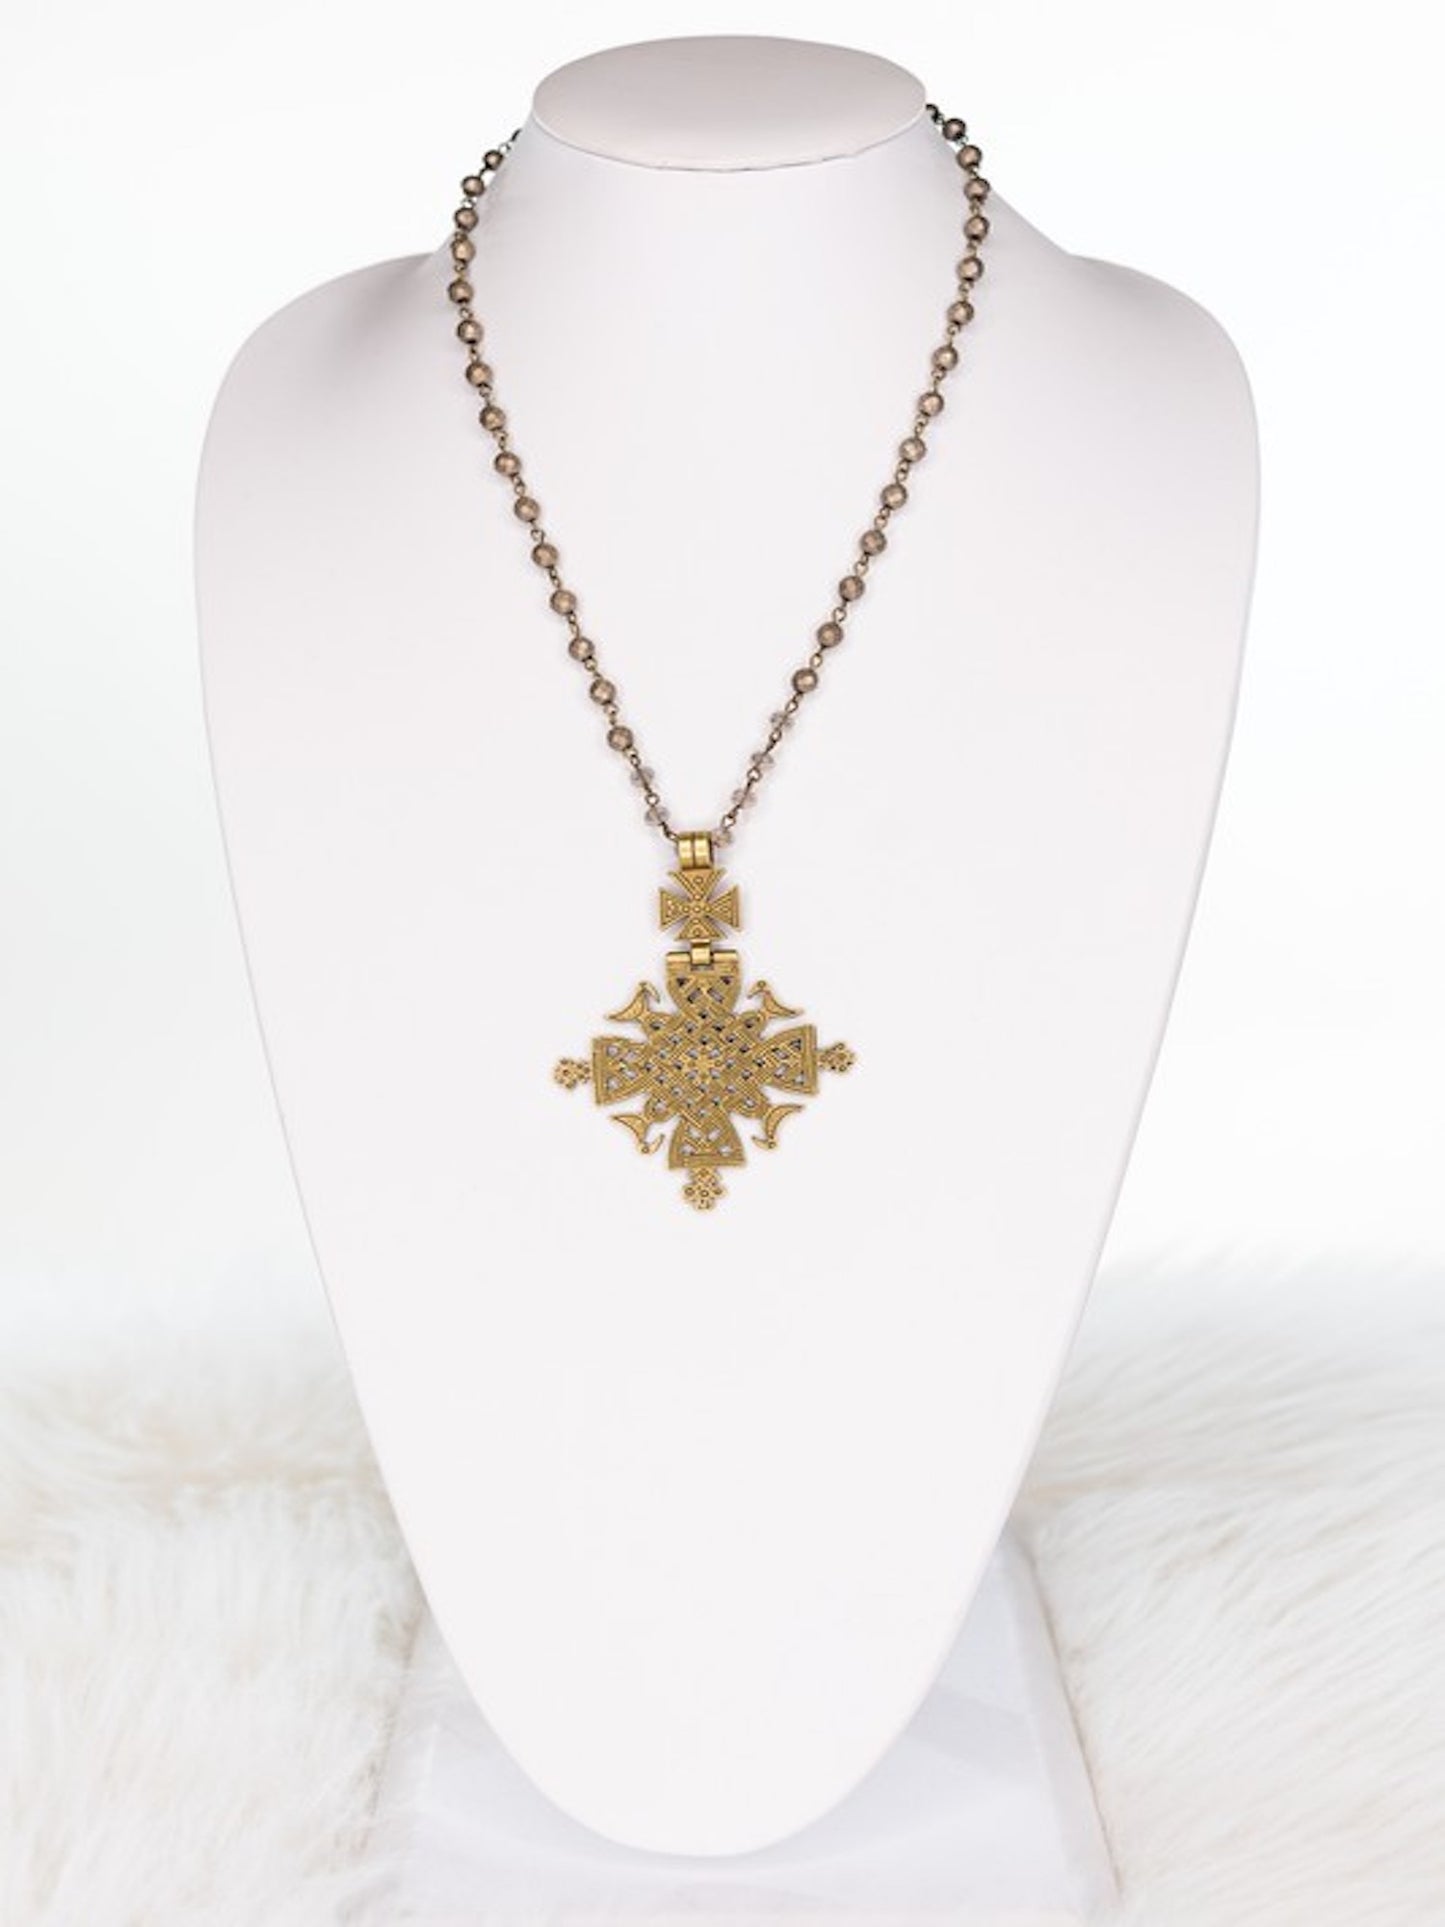 The Delaney Cross Necklace